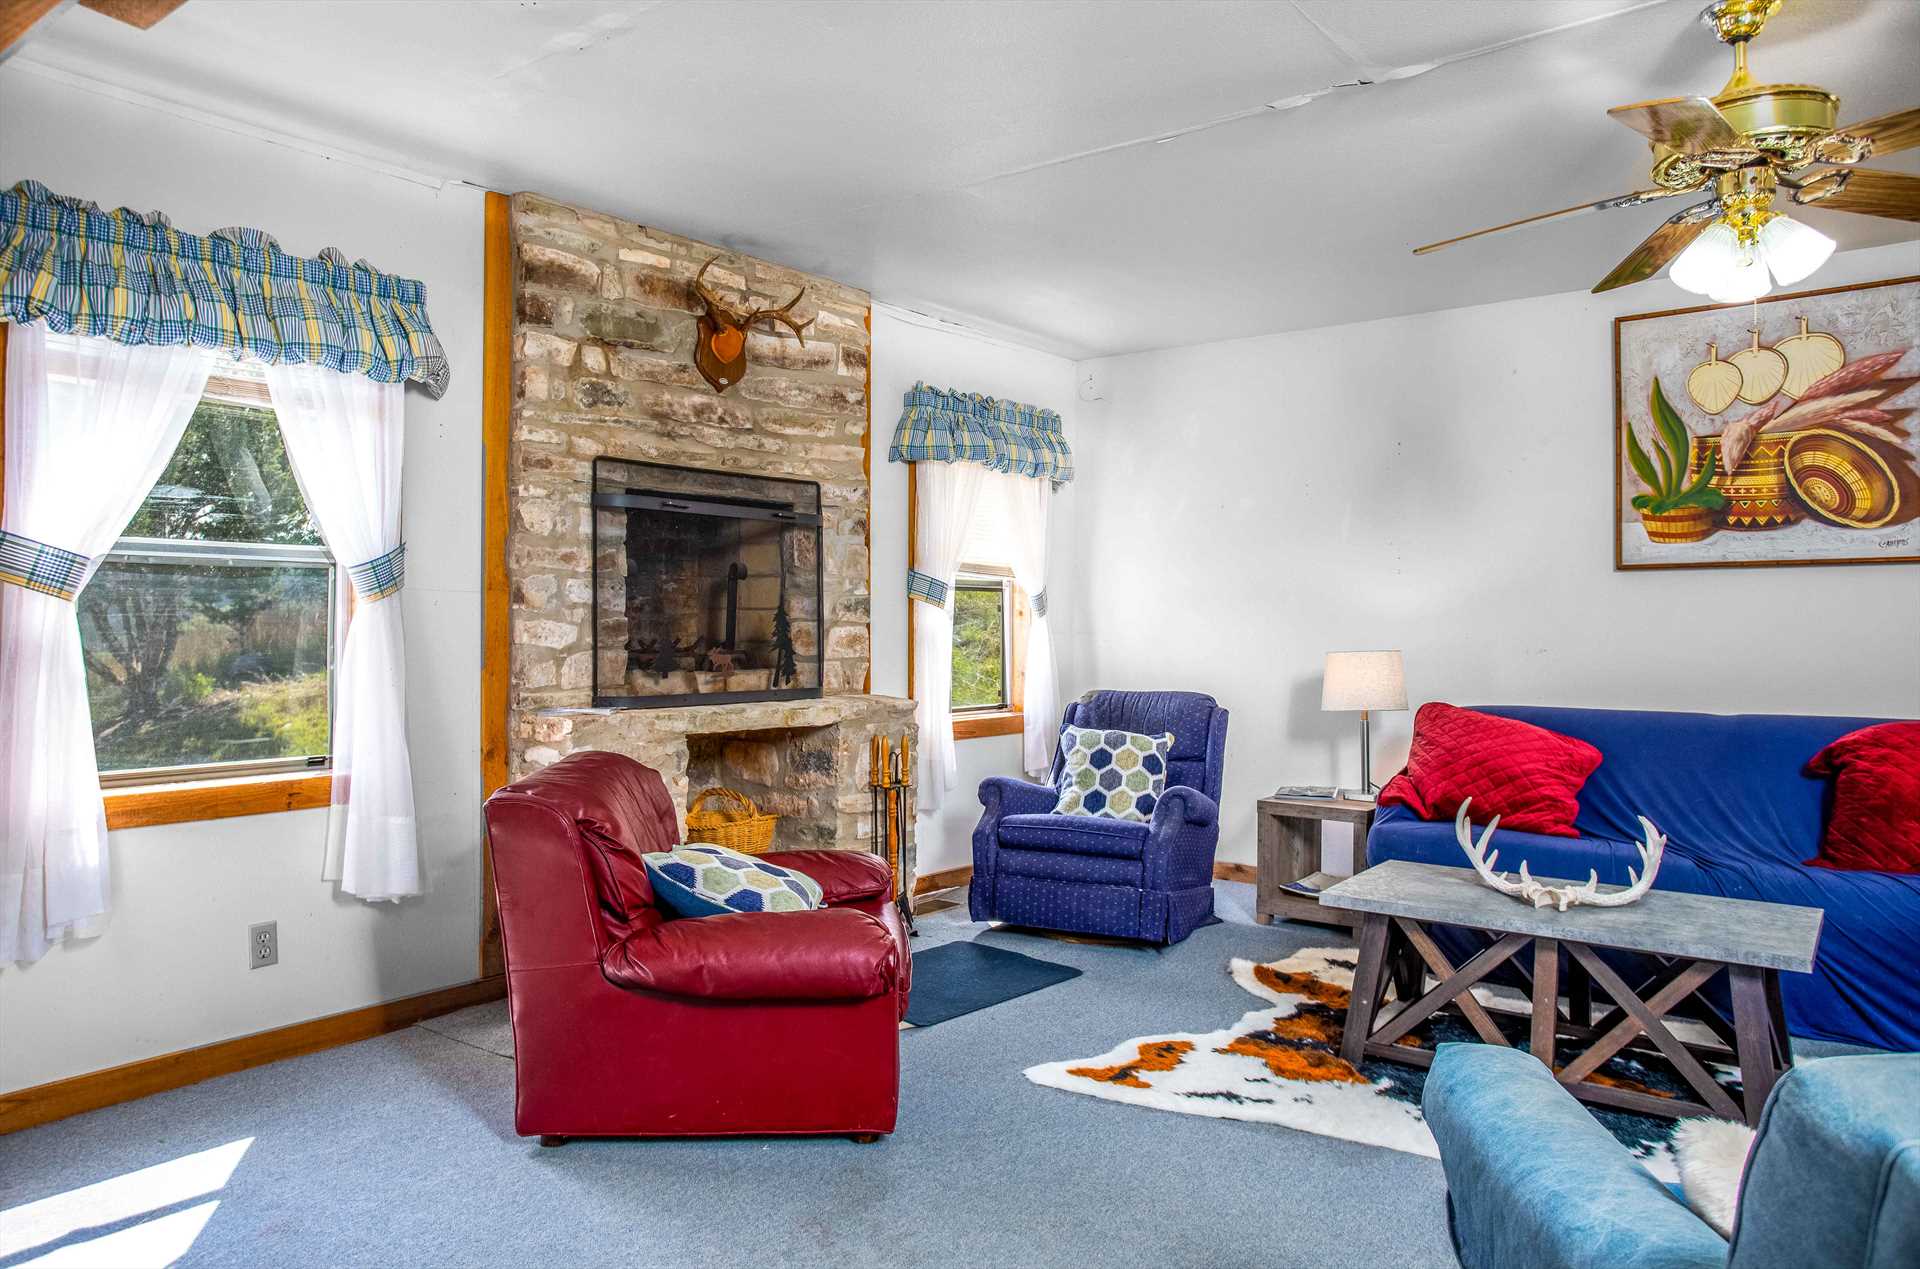                                                 Country gingham, a warm fireplace, and comfortable furnishings all add up to a relaxing and homey living space in the Hill House!